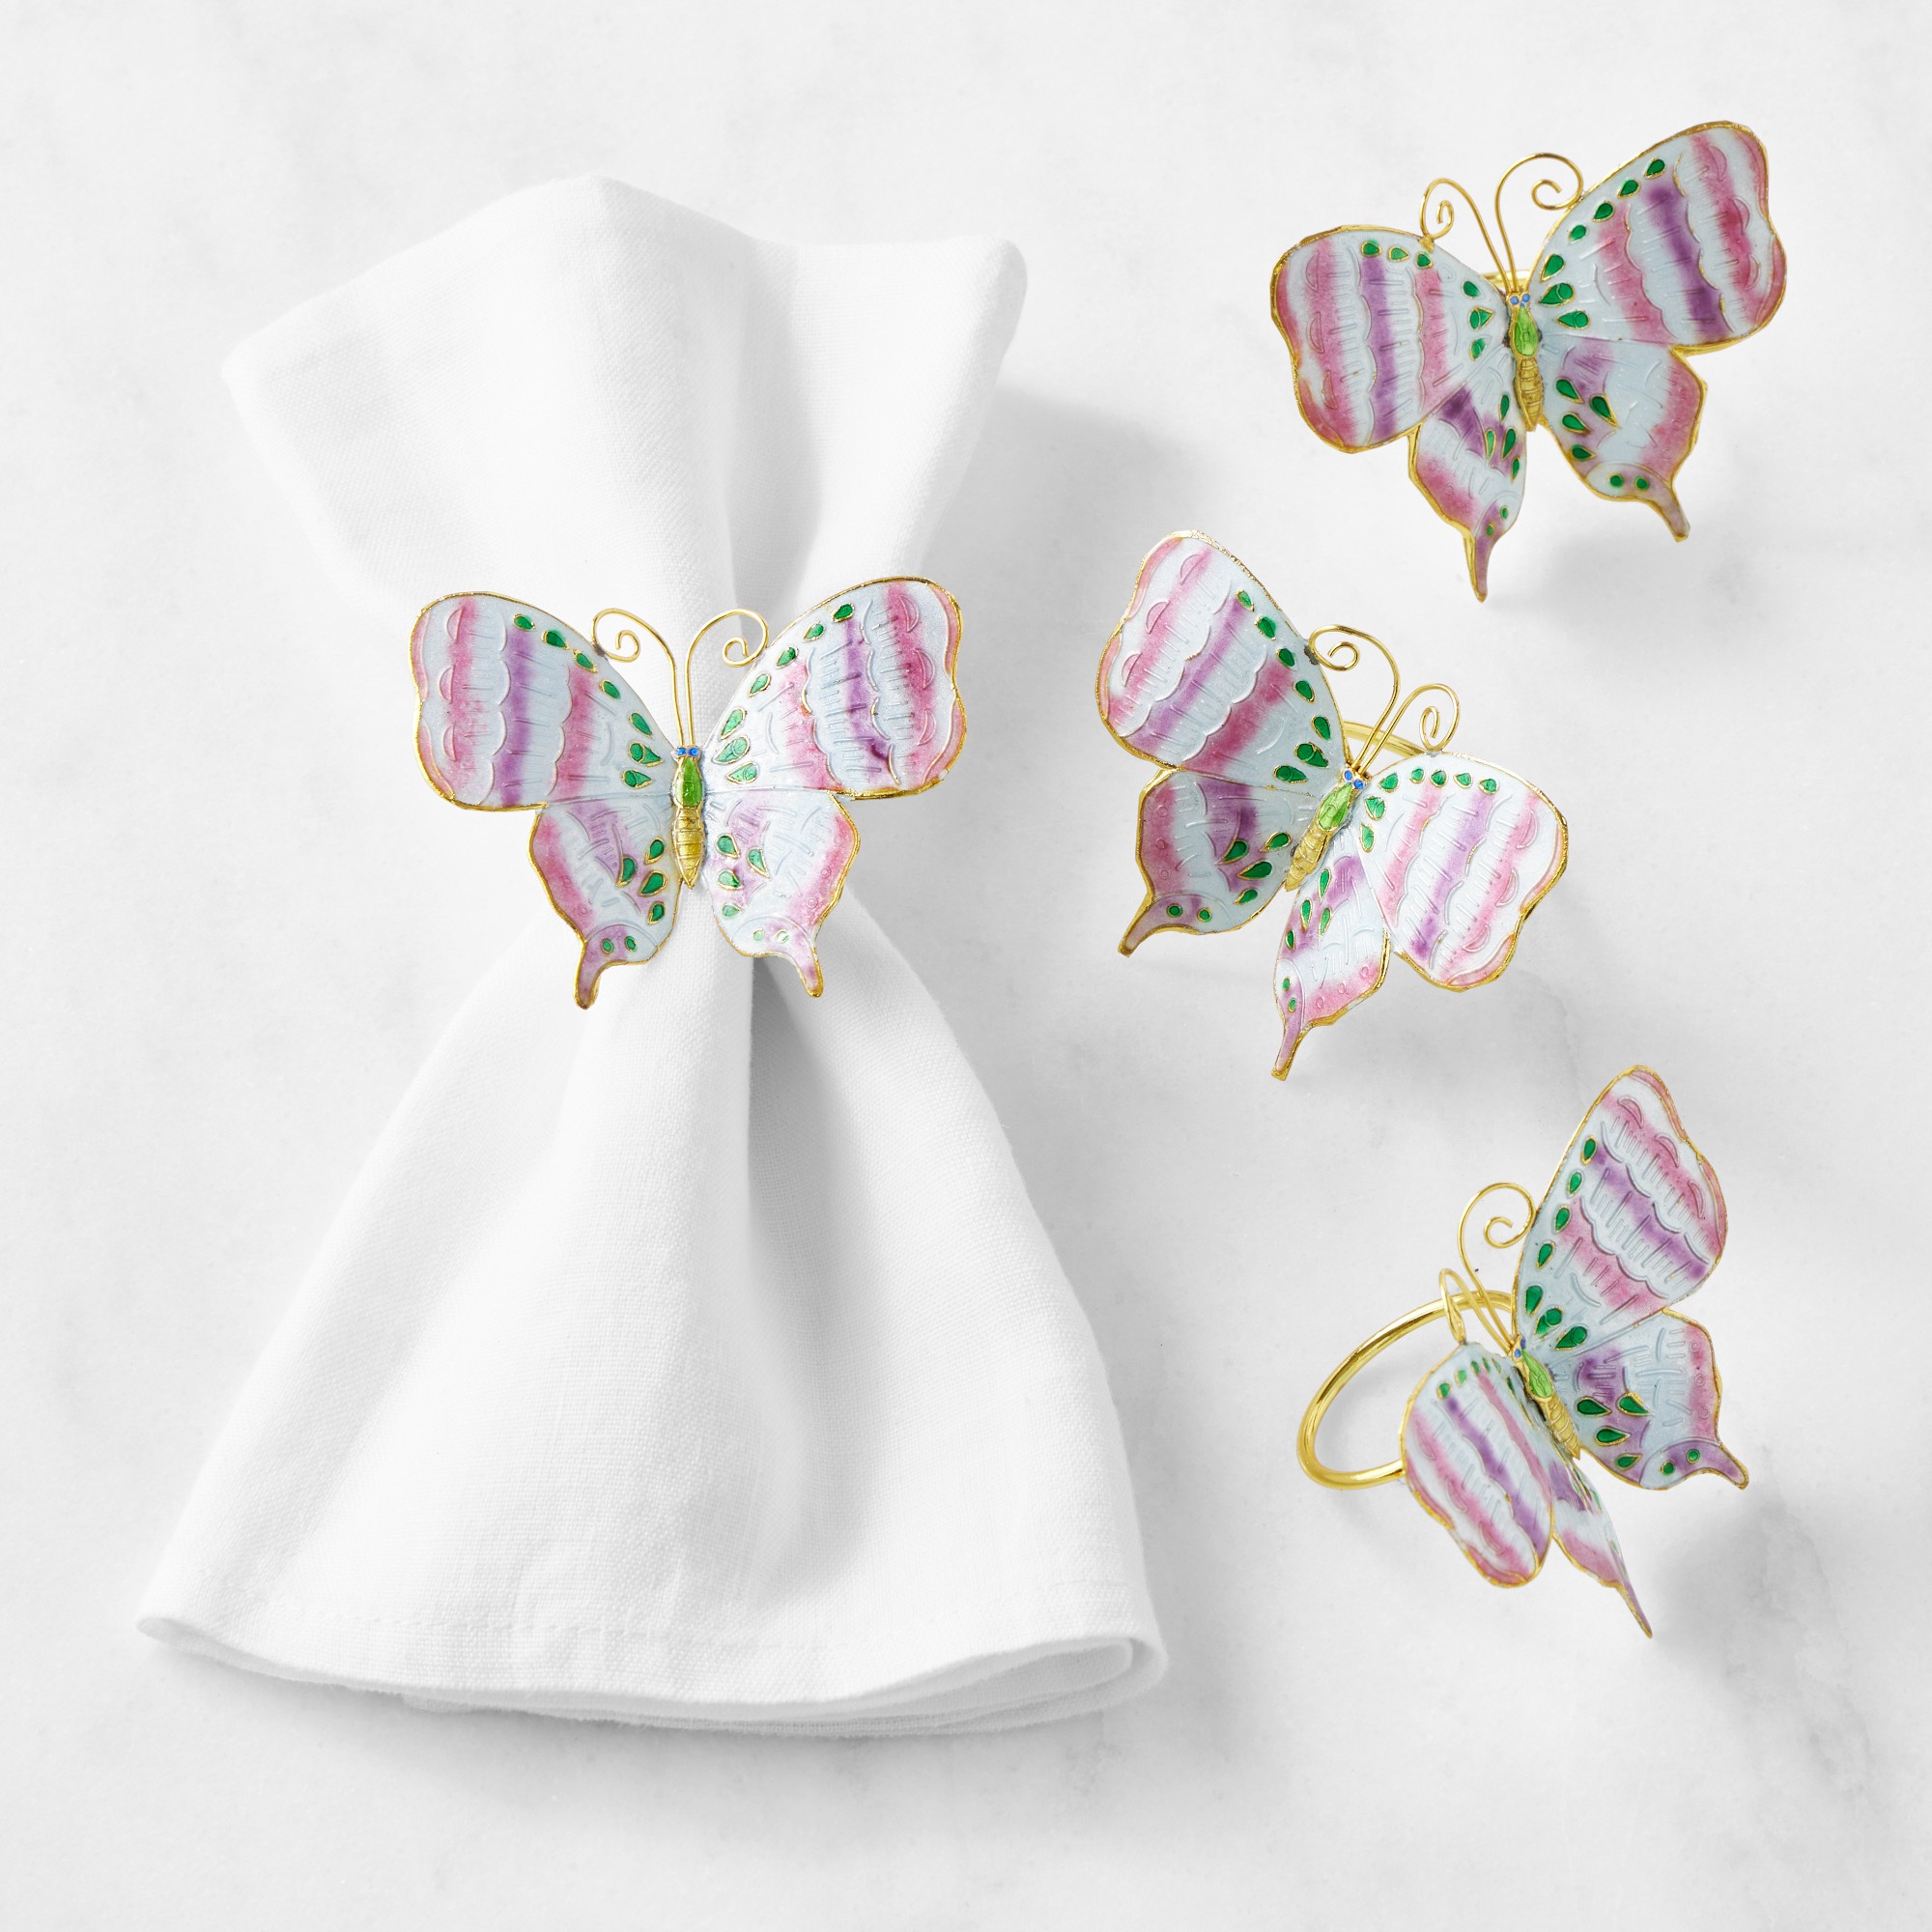 Cloisonne Butterfly Napkin Rings, Set of 4